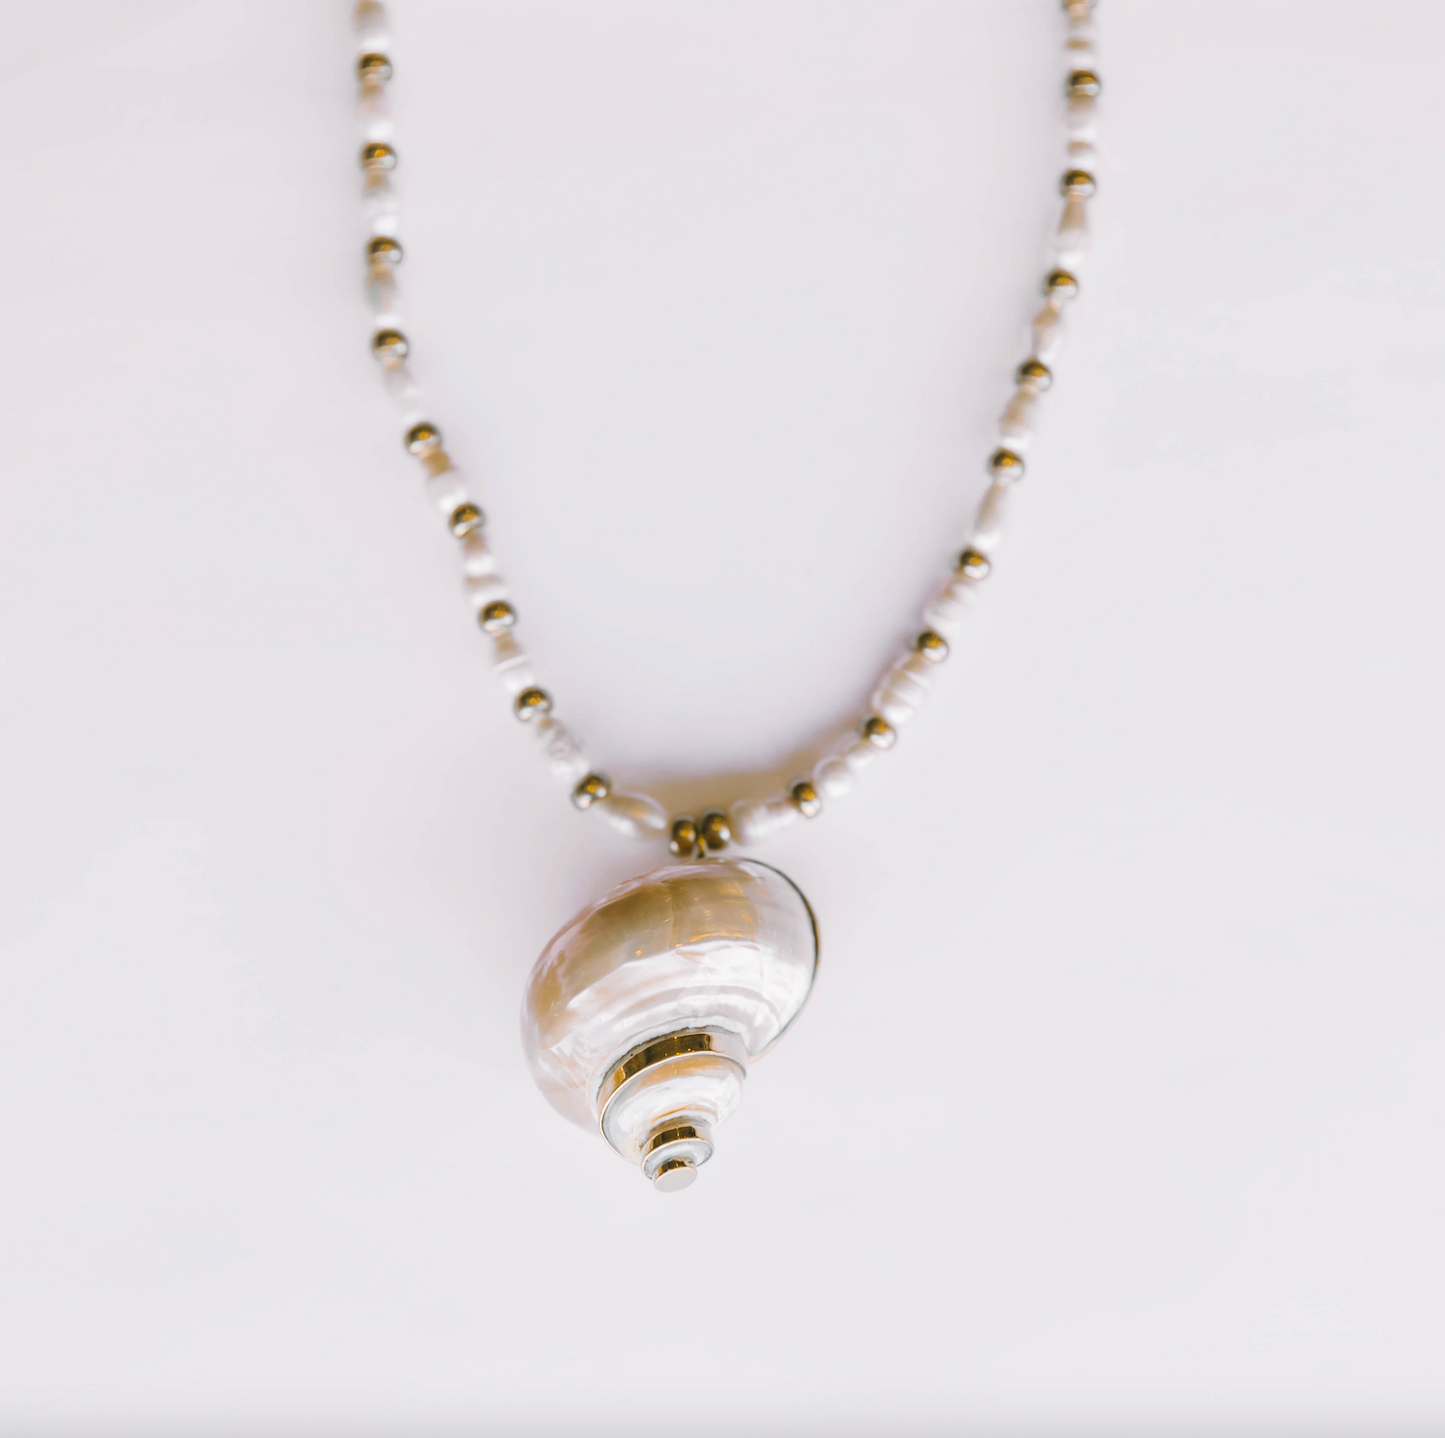 The Forever Cali Summer Shell Necklace